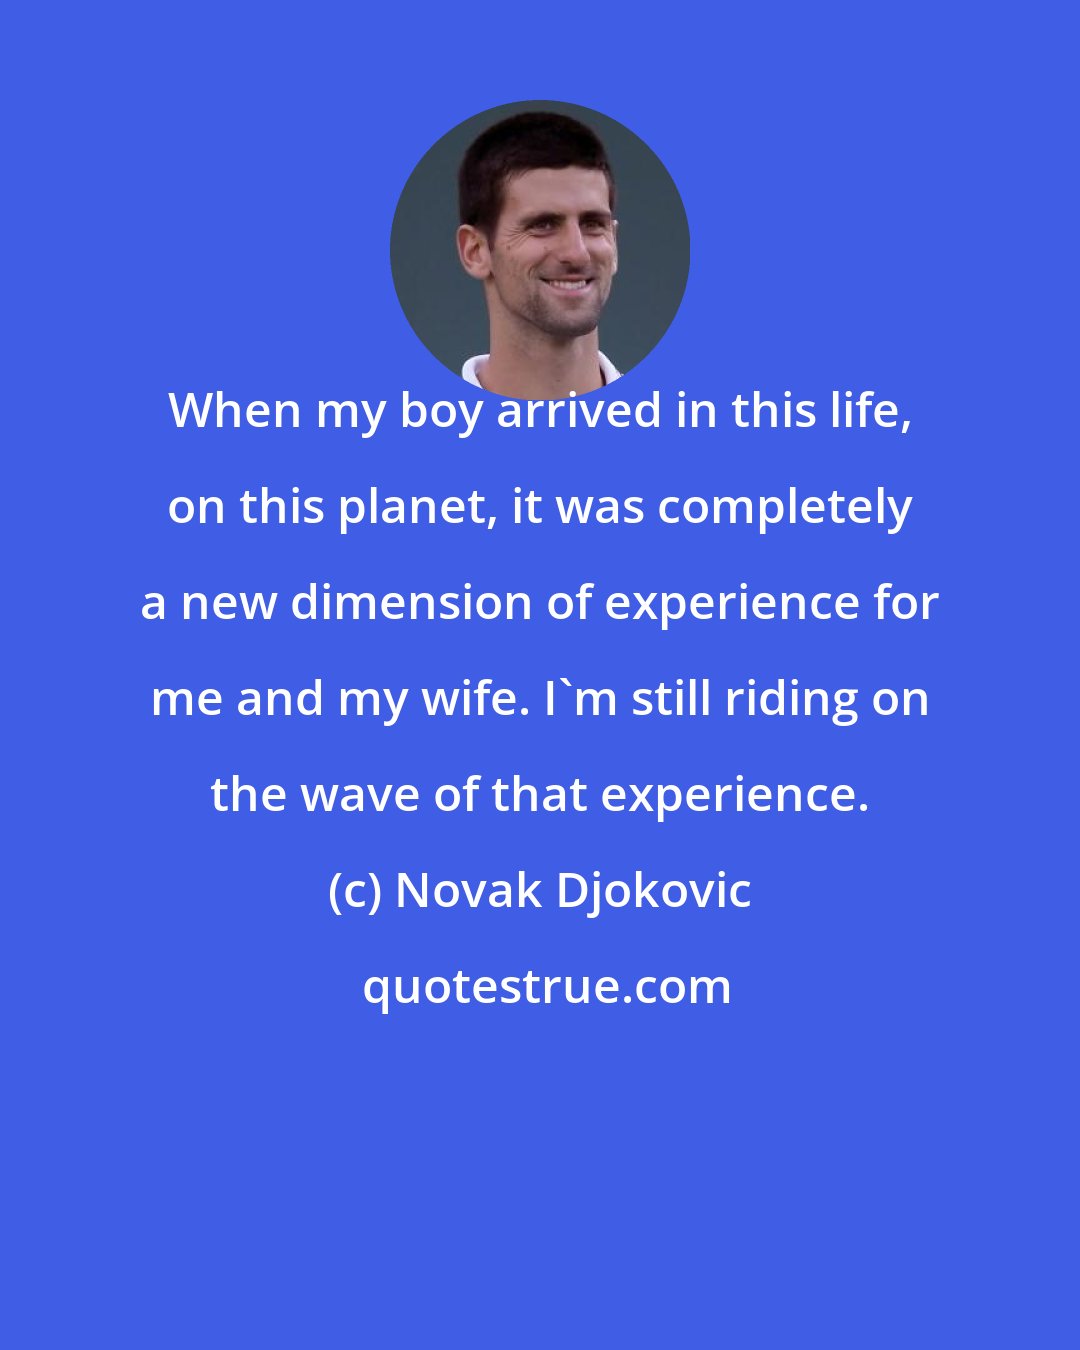 Novak Djokovic: When my boy arrived in this life, on this planet, it was completely a new dimension of experience for me and my wife. I'm still riding on the wave of that experience.